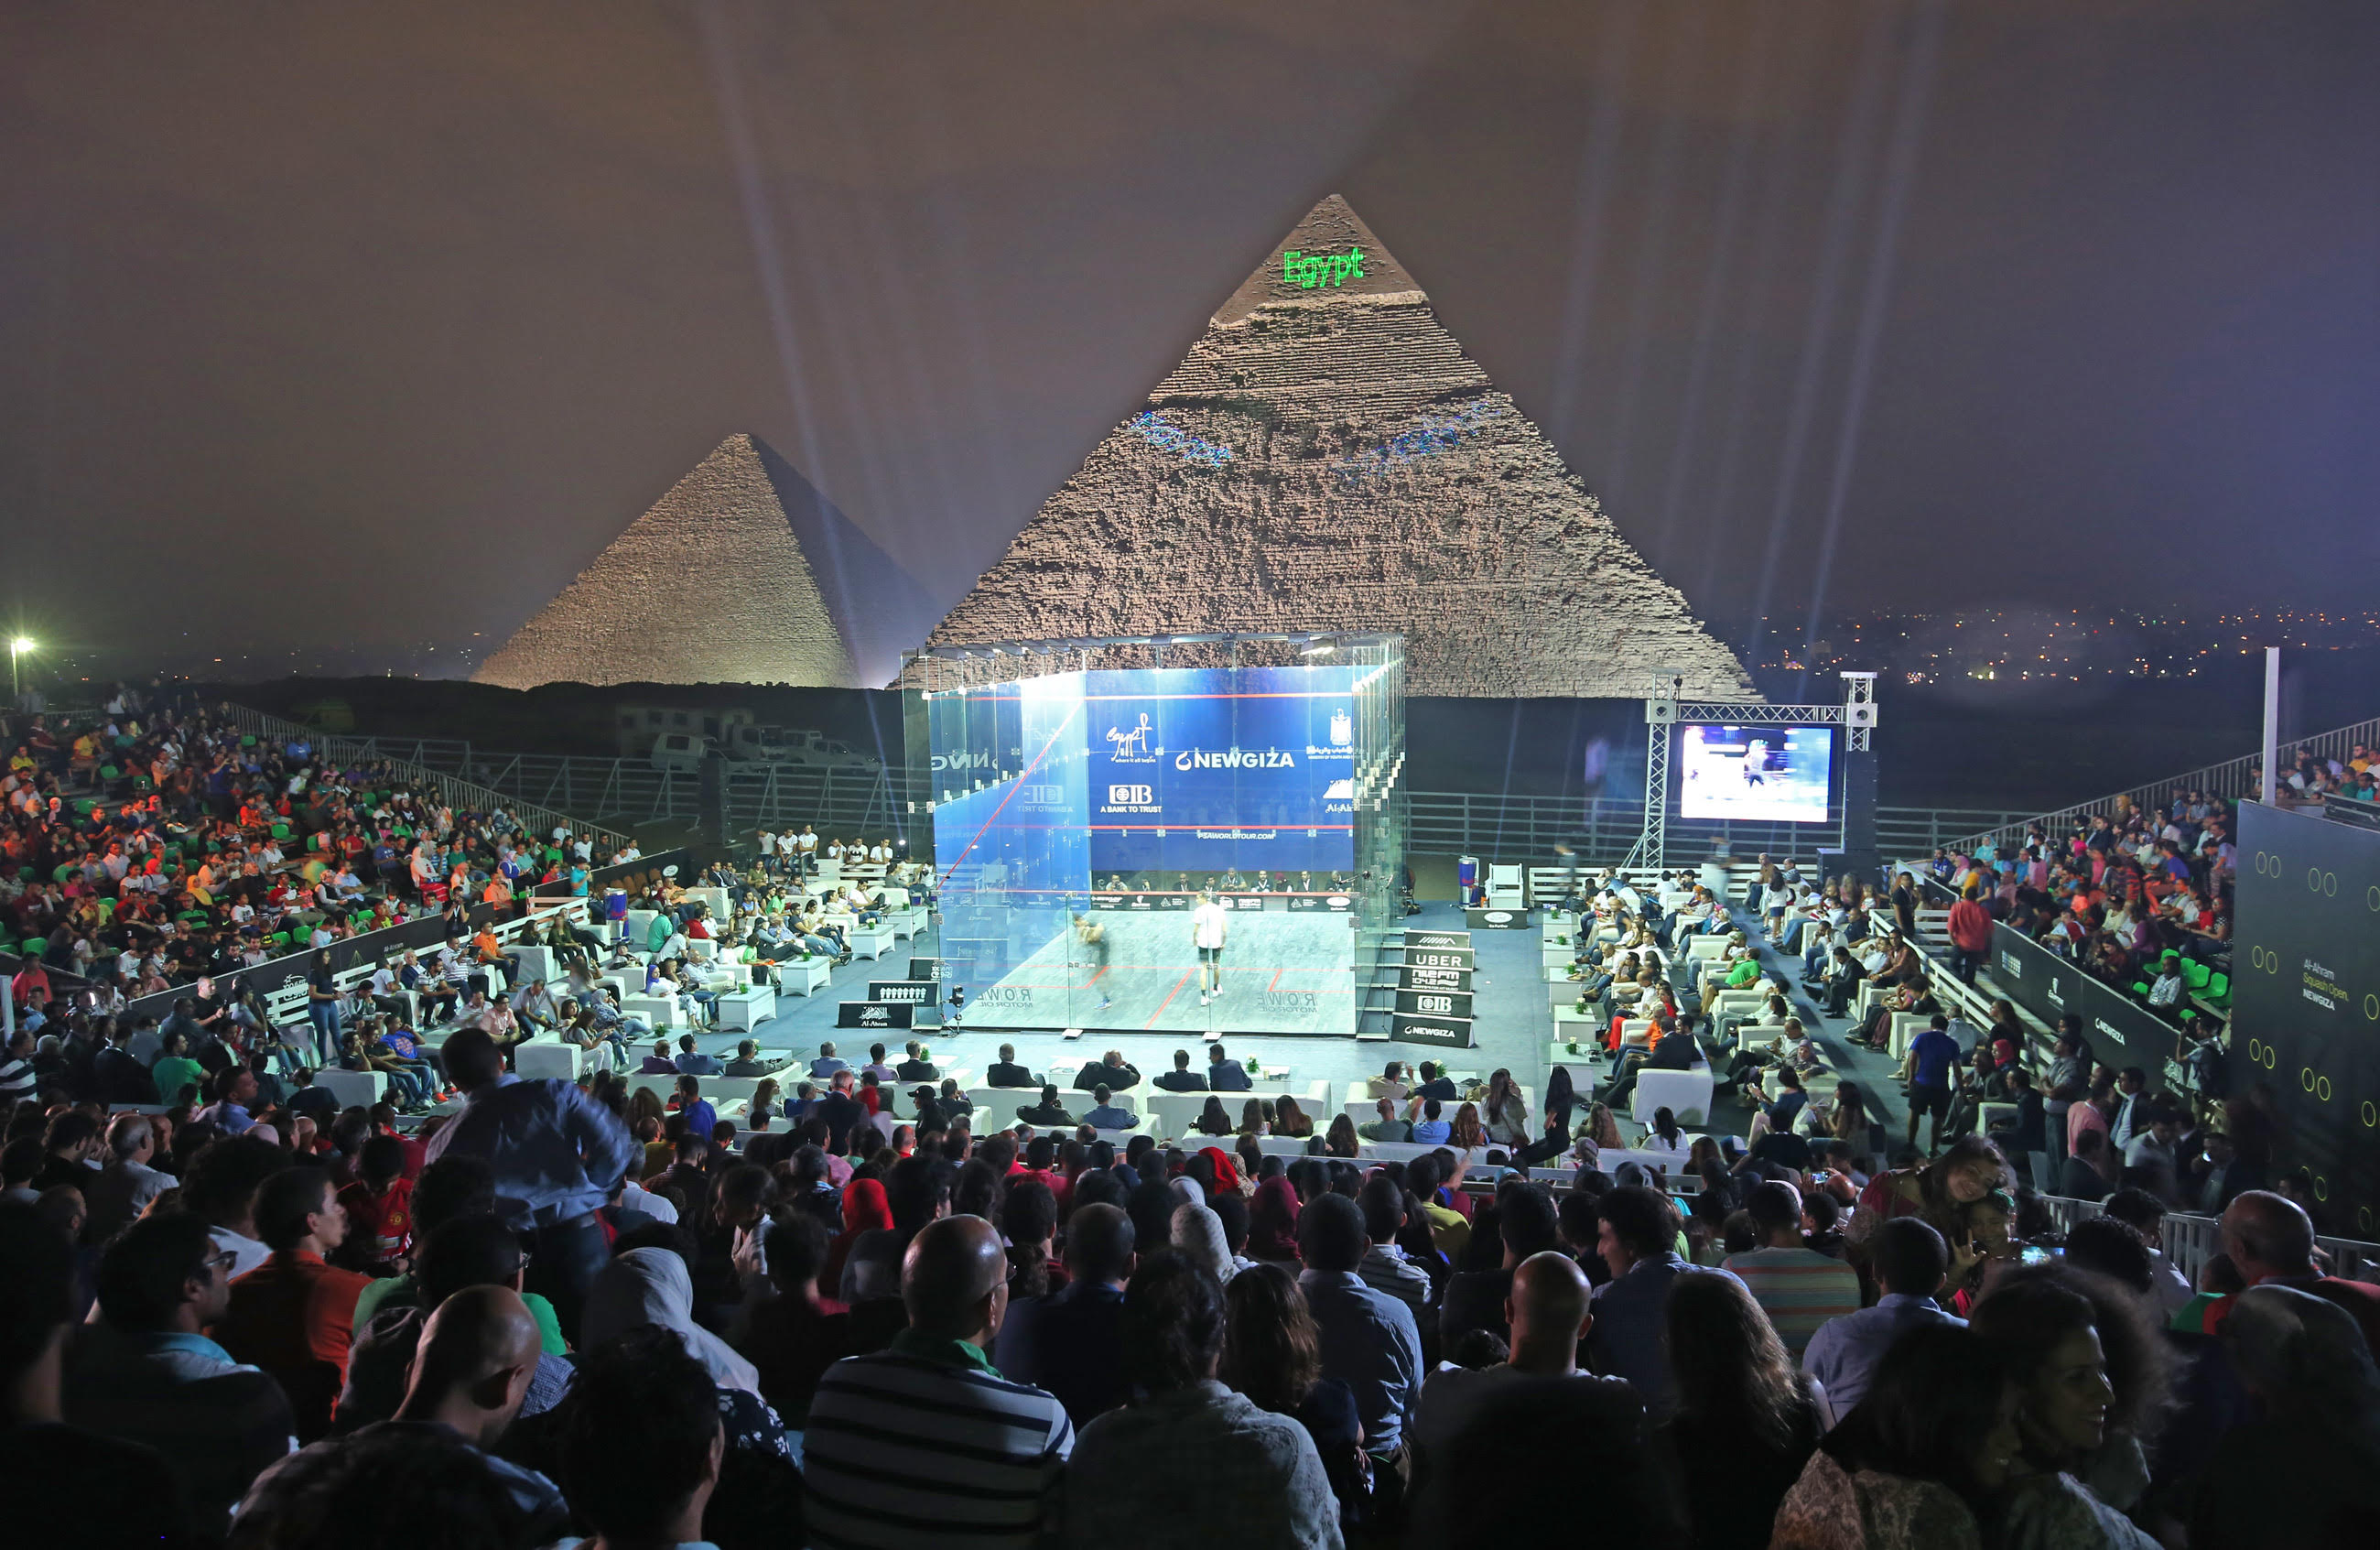 CIB is bringing the world’s biggest squash event to the Pyramids